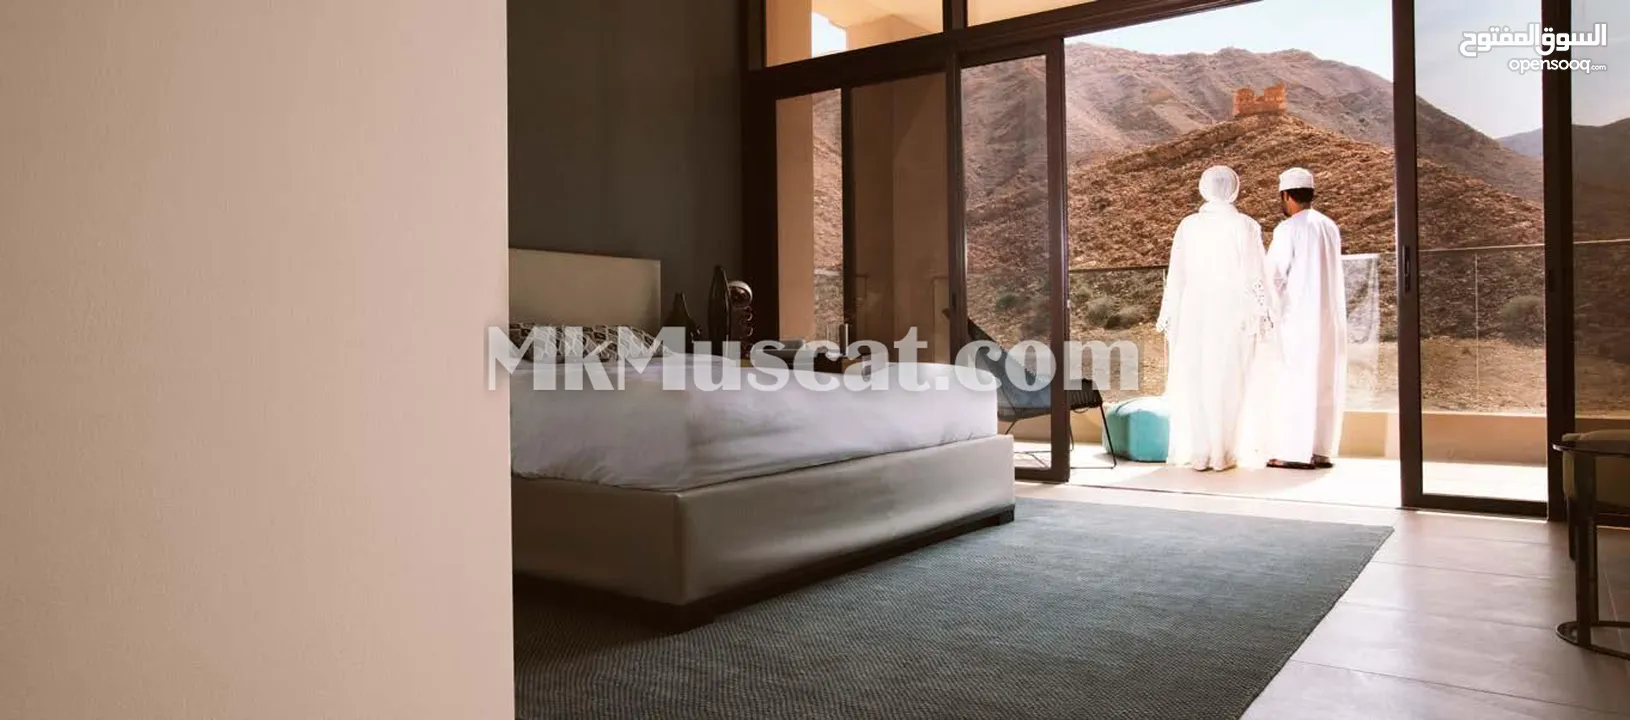 villa for sale in installments and repayment for 3 years with permanent residence in Oman